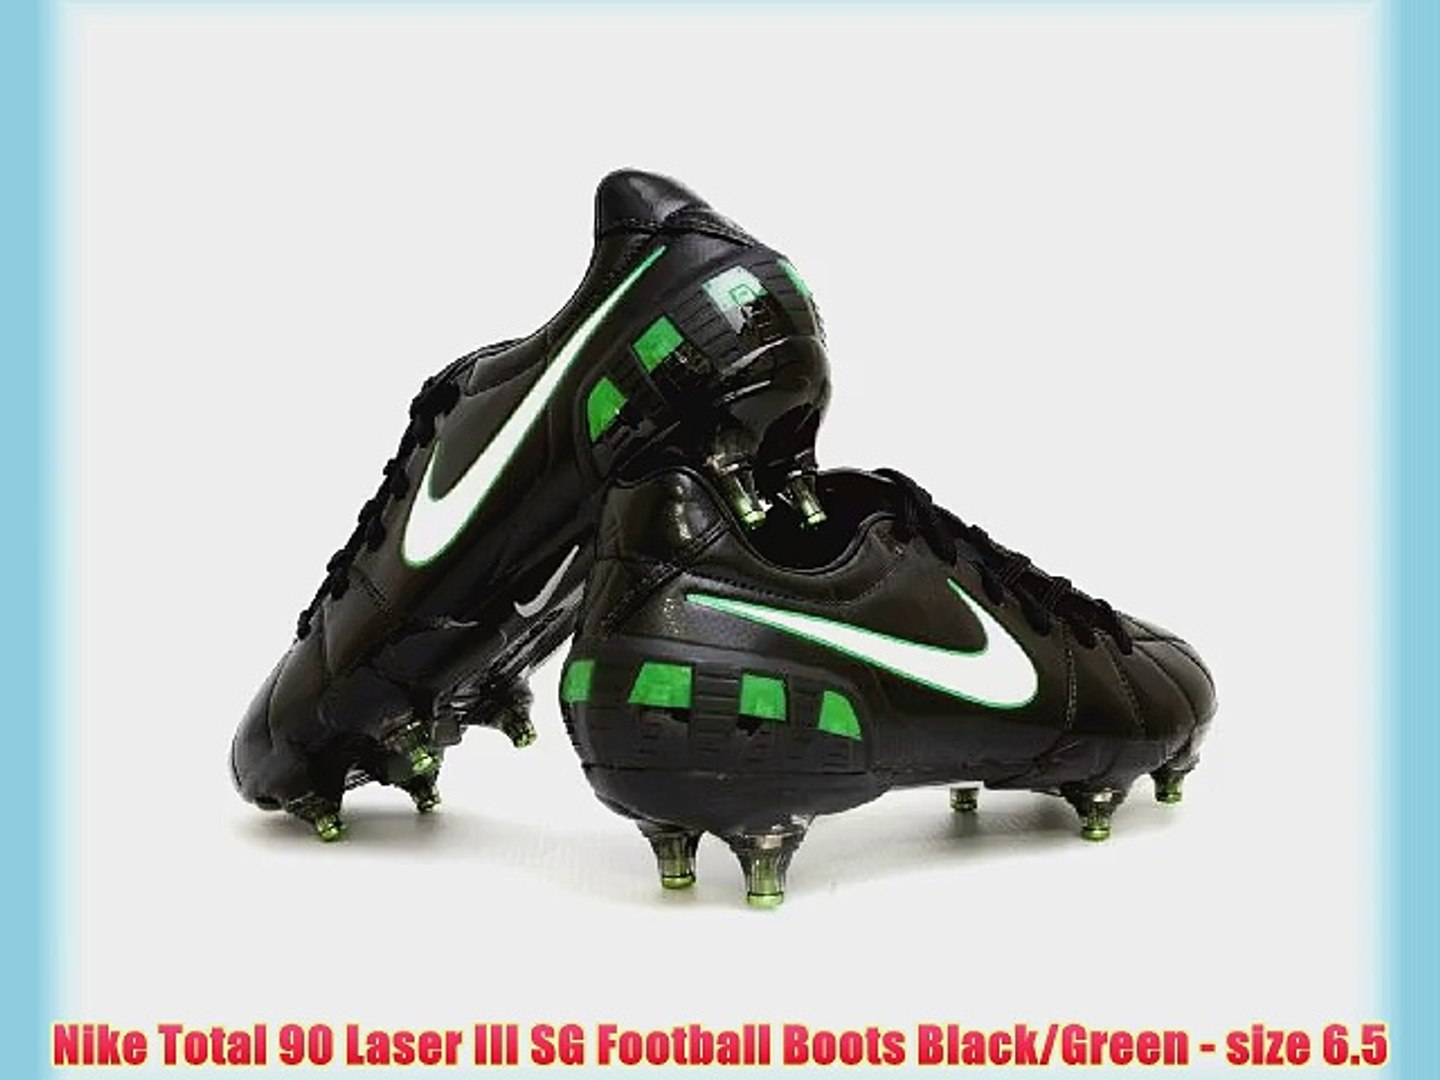 nike t90 boots